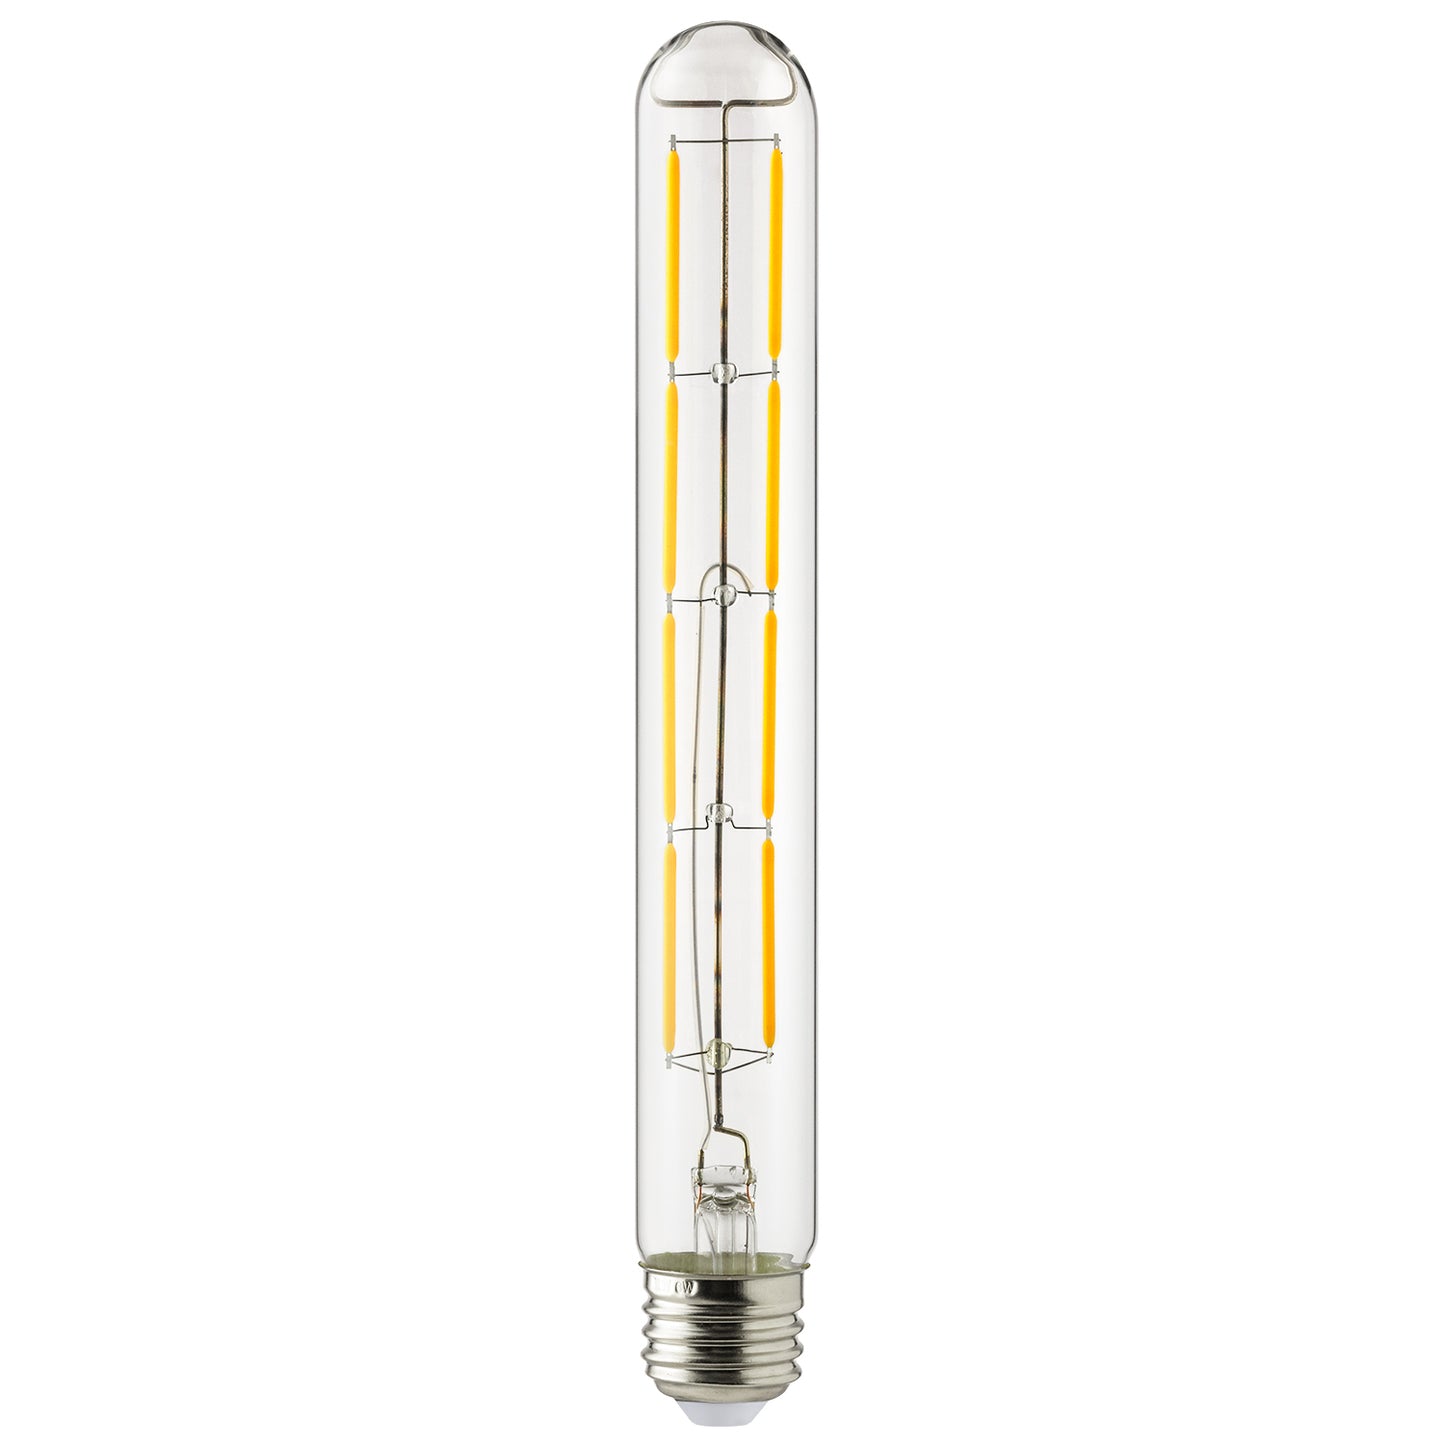 Sunlite 80621 LED Filament T10 Tubular Light Bulb, 6 Watts (60W Equivalent), 570 Lumens, Medium E26 Base, 120 Volts, Dimmable, 90 CRI, UL Listed, Clear, Title-20 Compliant, 2700K Soft White - 5 Pack